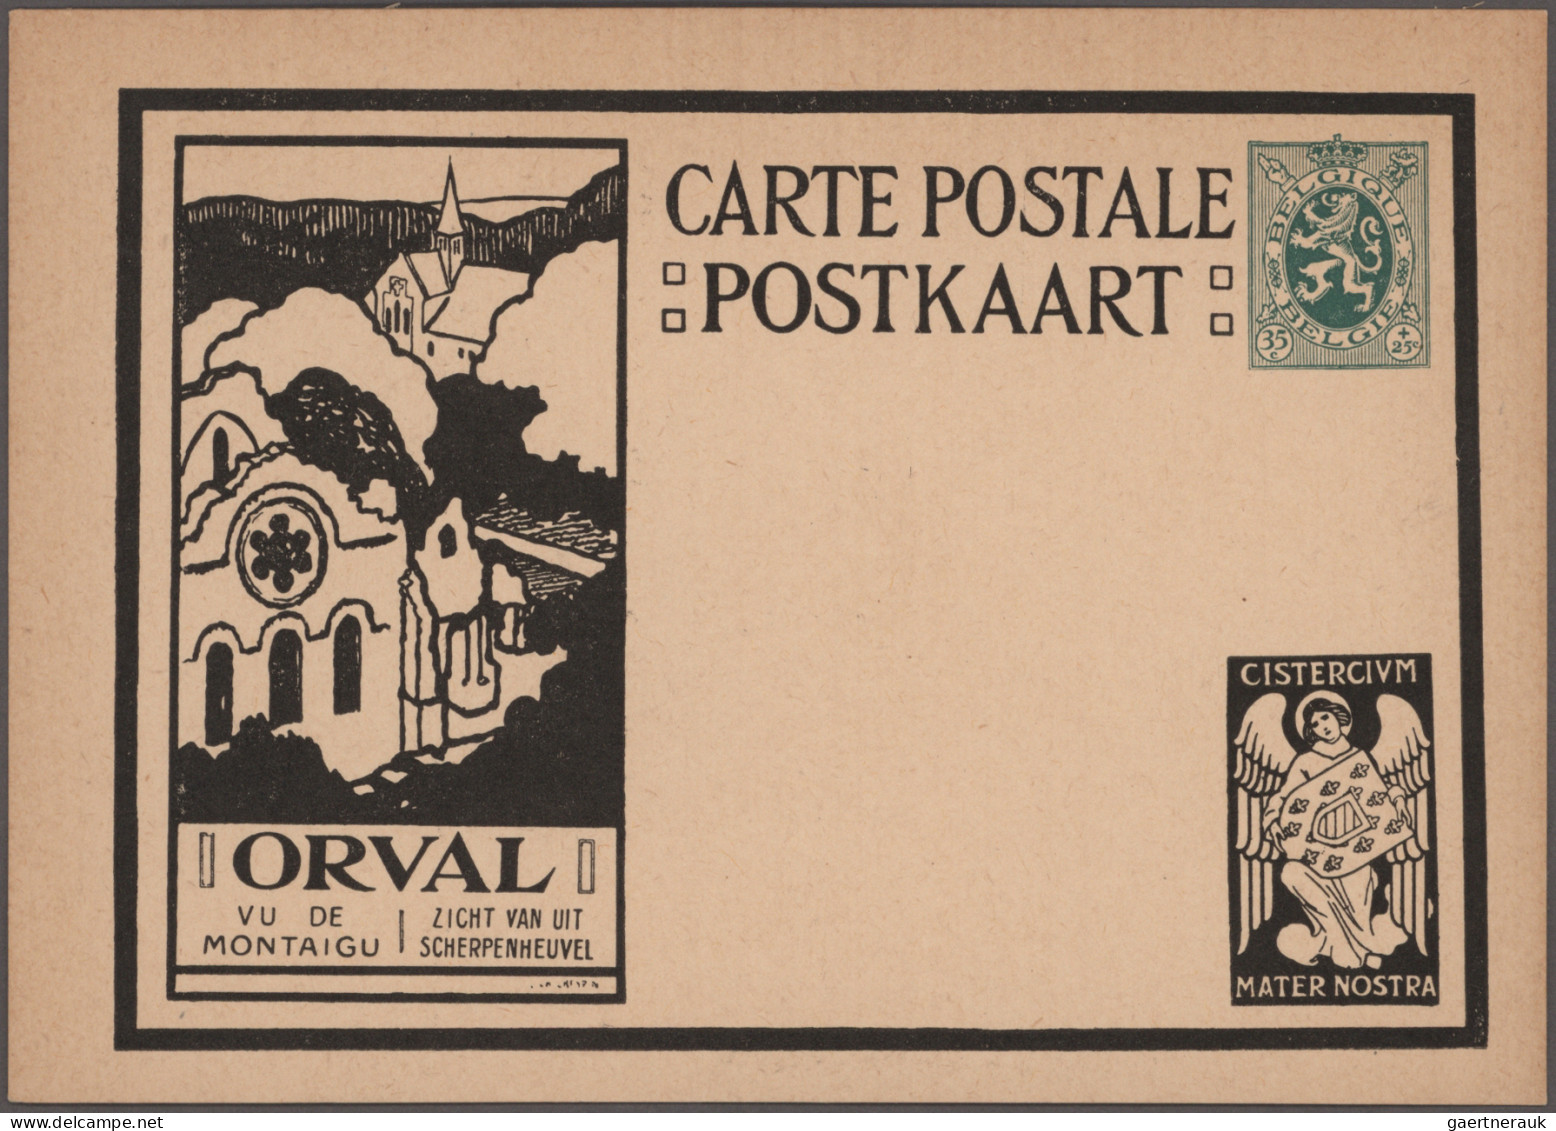 Belgium - postal stationery: 1900/1972, Pictorial/Advertising cards, assortment